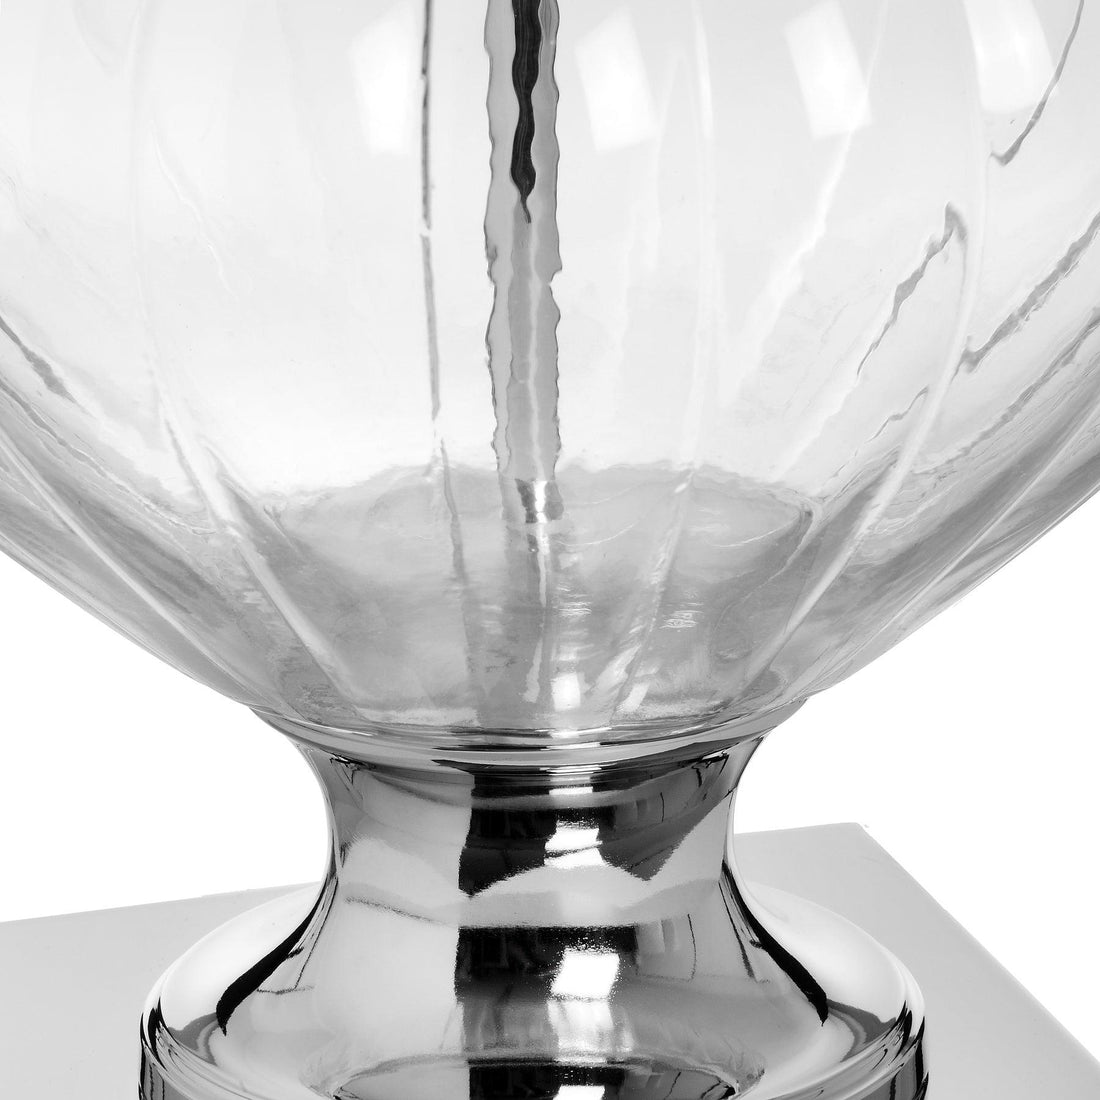 Verona Glass Table Lamp - £204.95 - Lighting > Table Lamps > Hottest Deals 